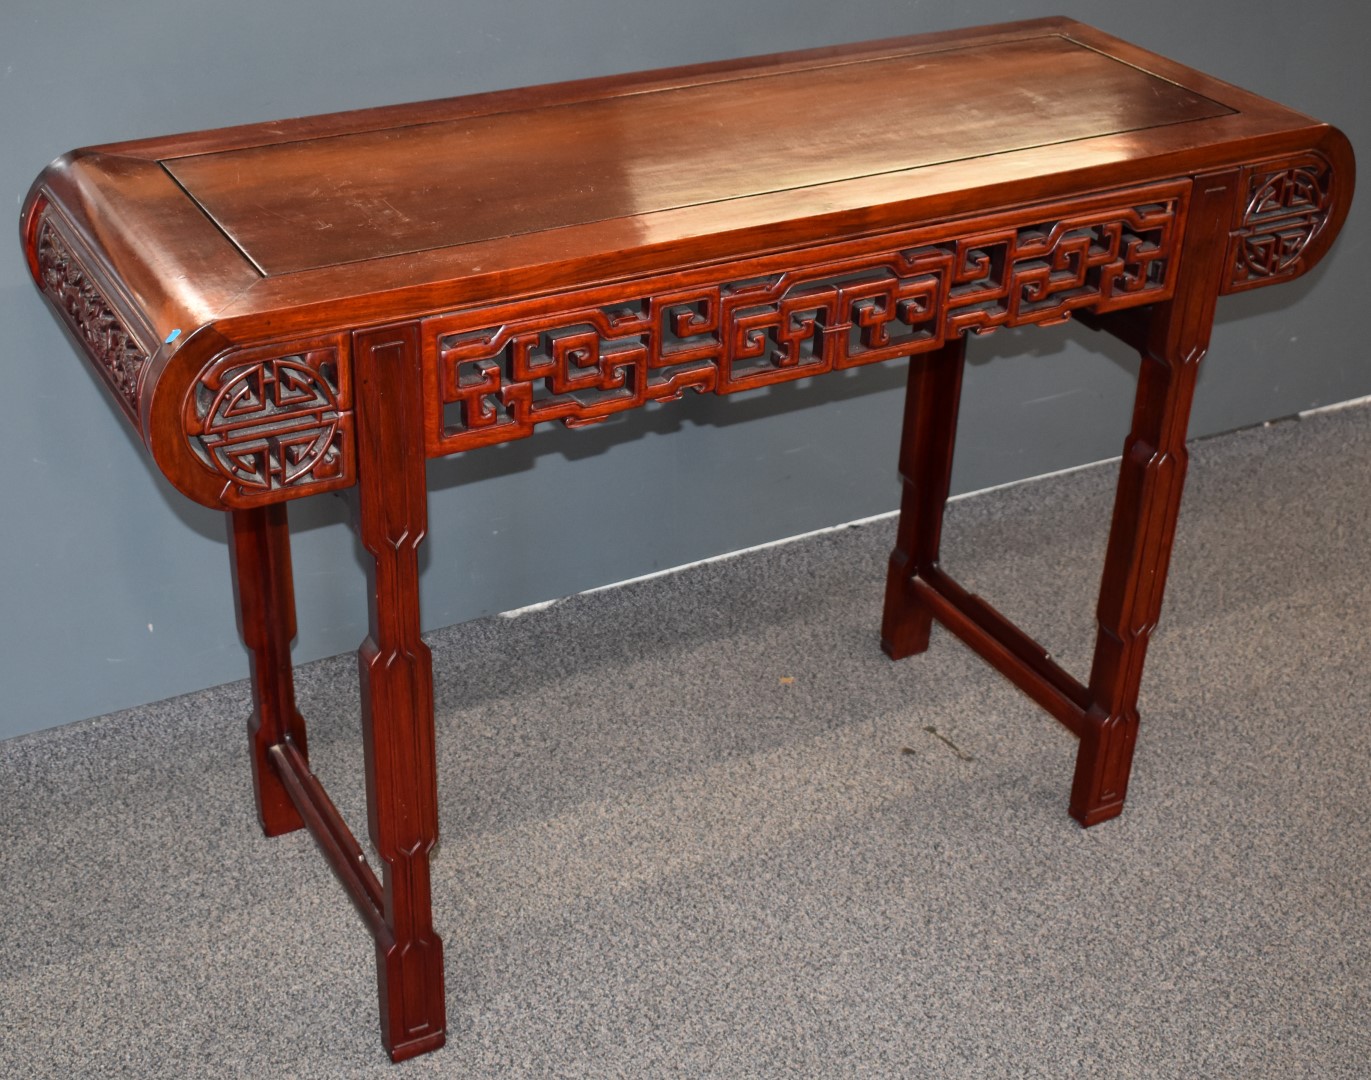 Carved oriental hardwood altar table with carved decoration, W127 x D43 x H83cm - Image 2 of 3